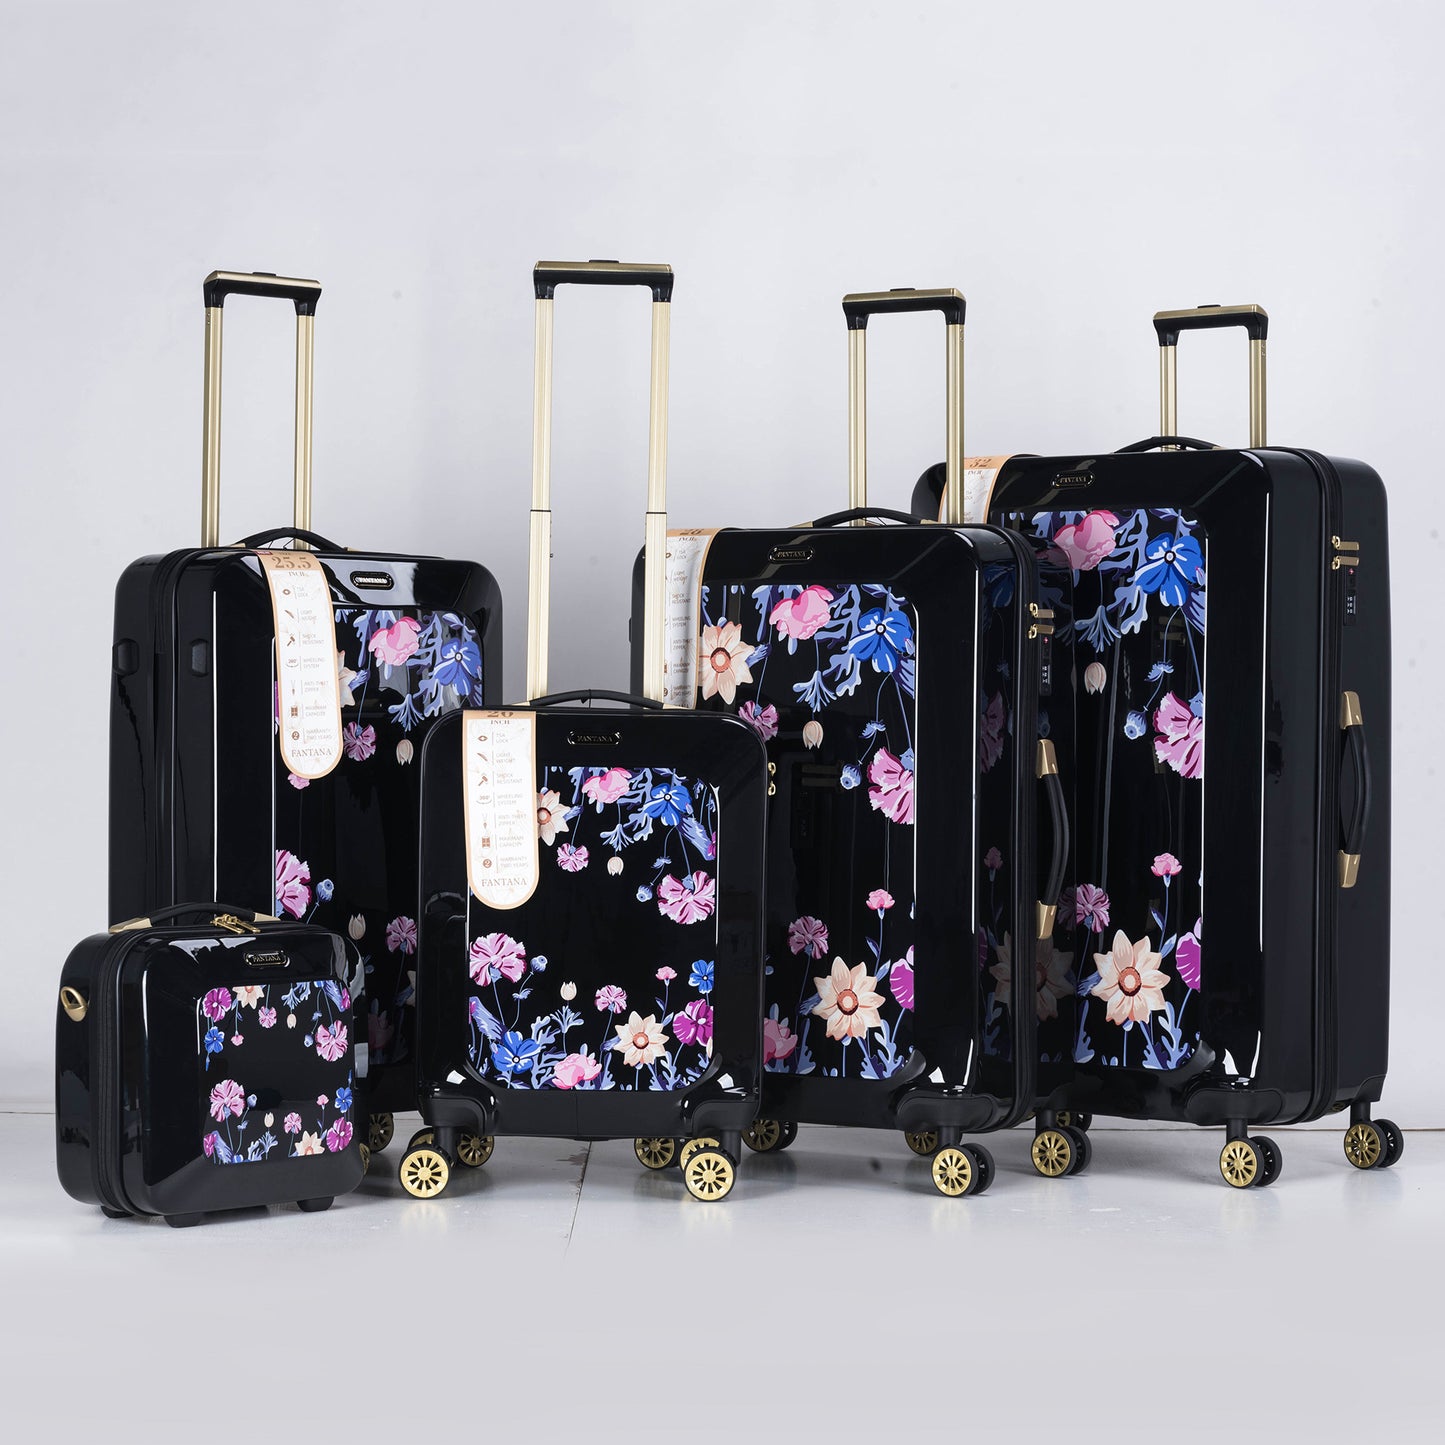 Suitcase Hard Shell with Flowers Black